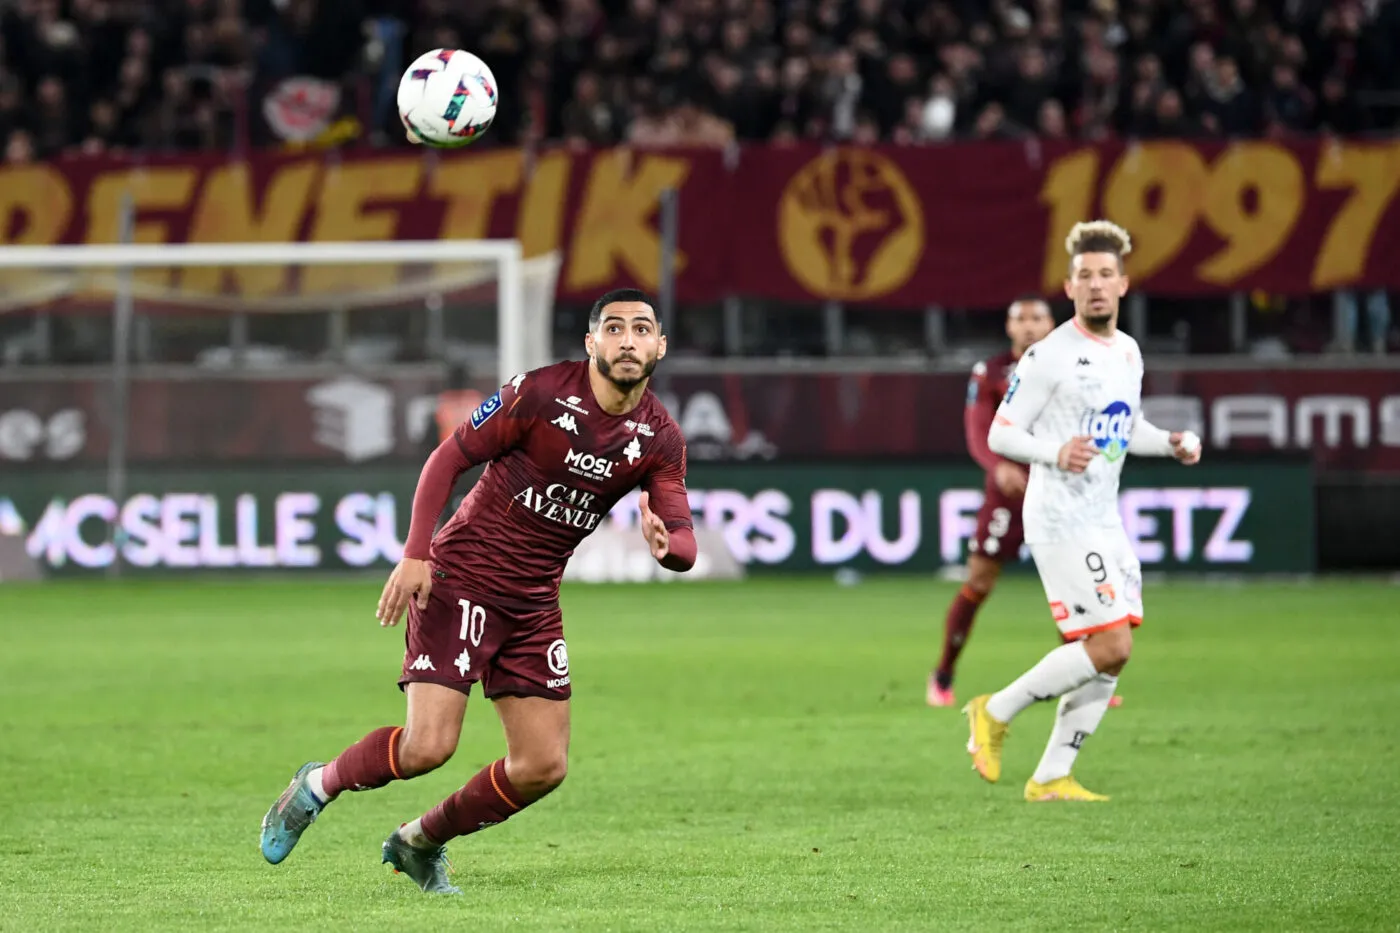 10 Youssef MAZIZ (fcm) during the Ligue 2 BKT match between Metz and Laval at Stade Saint-Symphorien on April 1, 2023 in Metz, France. (Photo by Christophe Saidi/FEP/Icon Sport)